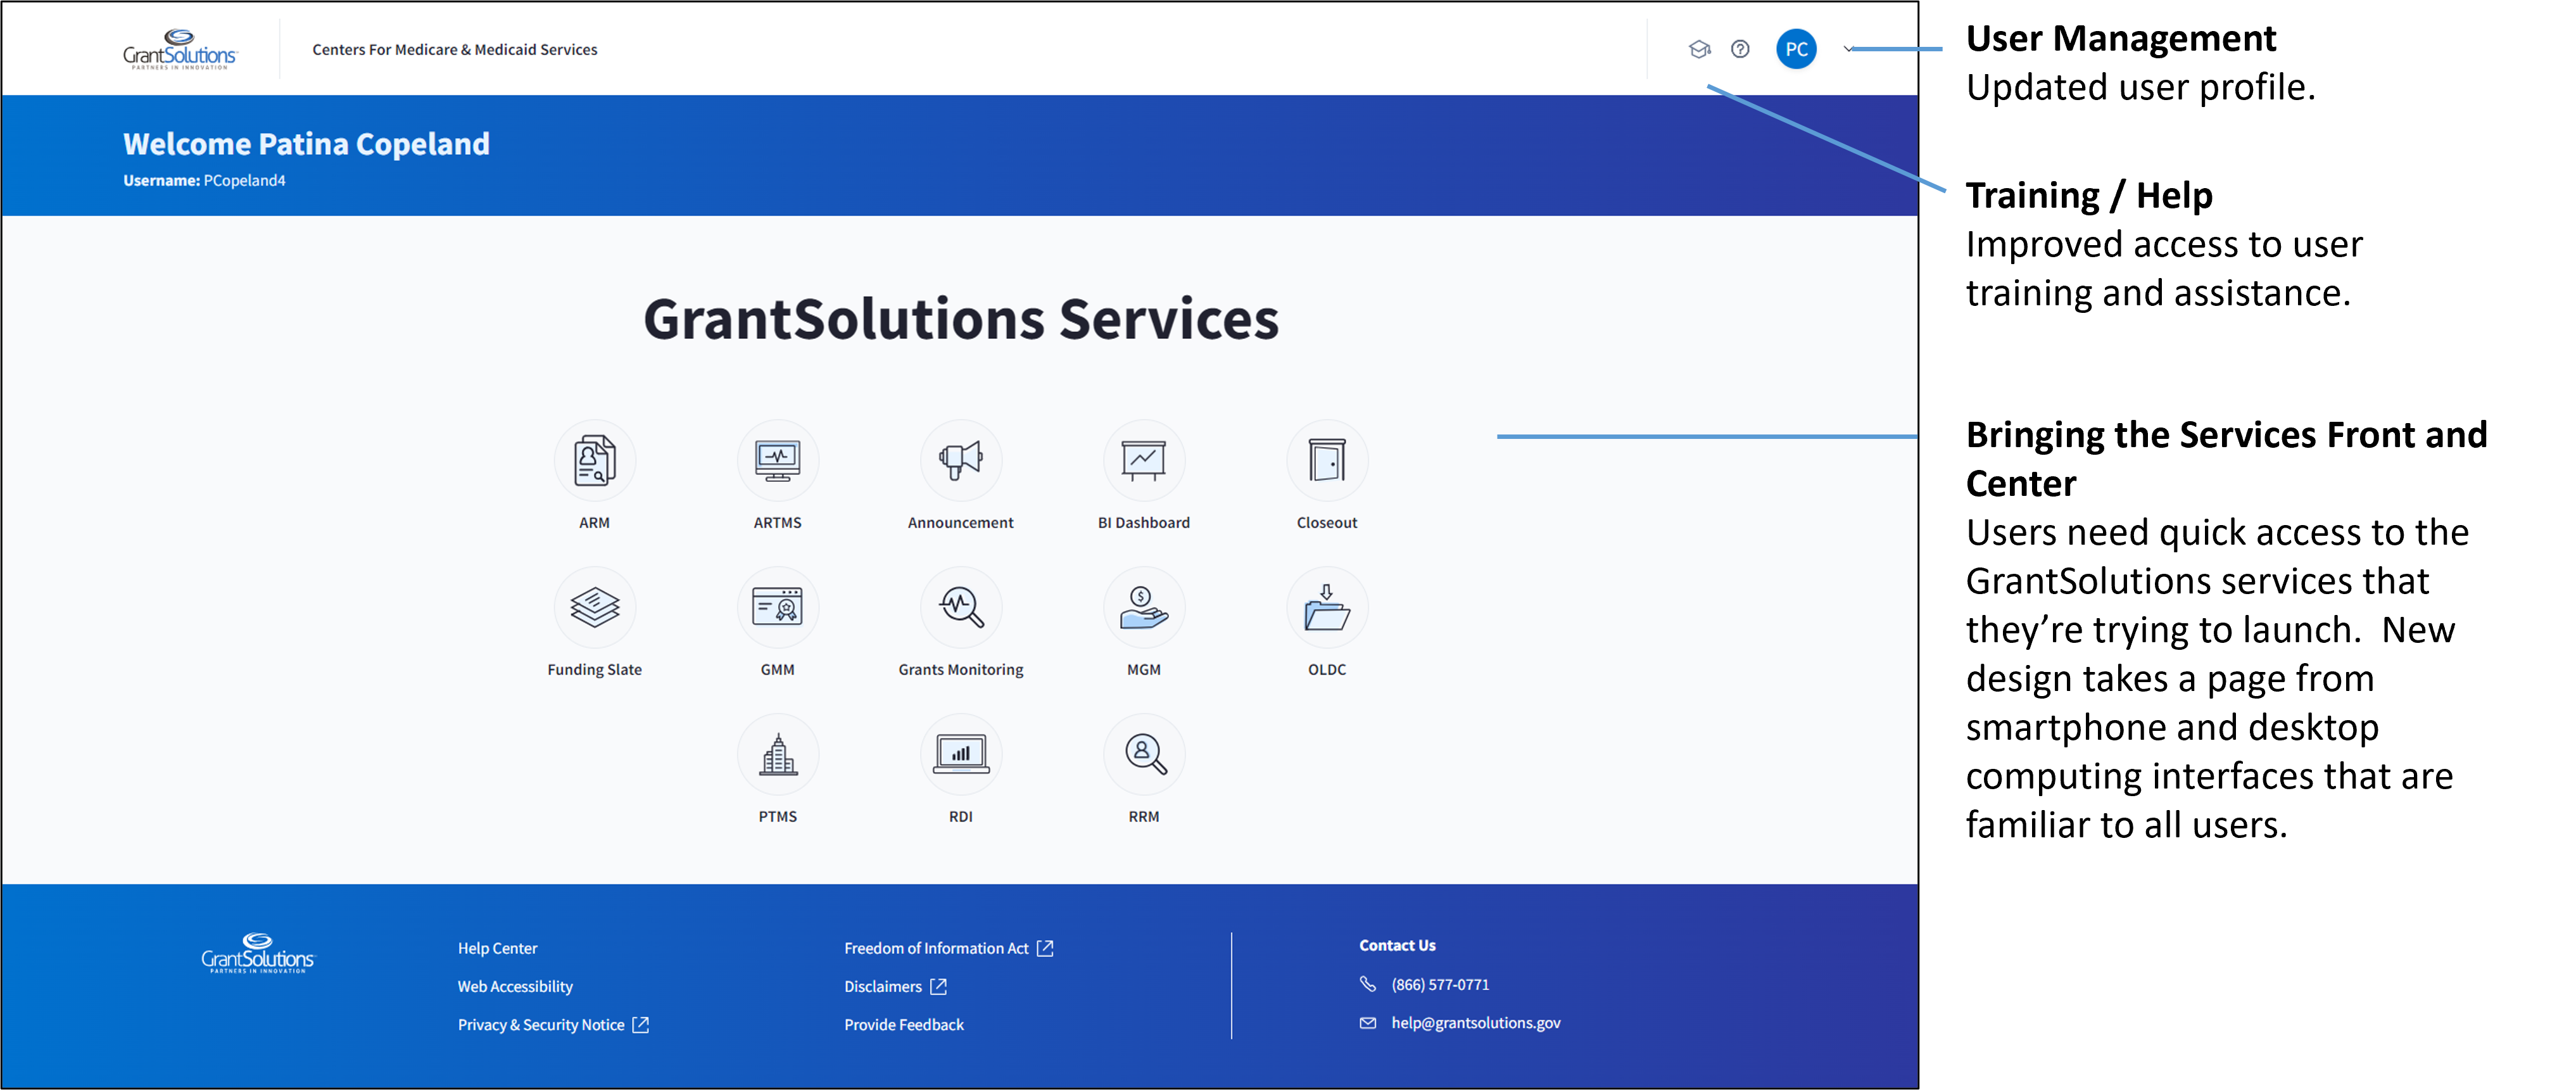 New System Landing Page: improves user management and access to user training and assistance. The new landing page brings the services users need front and center taking a page desgin from smartphones and desktop interfaces that are familiar to all users.